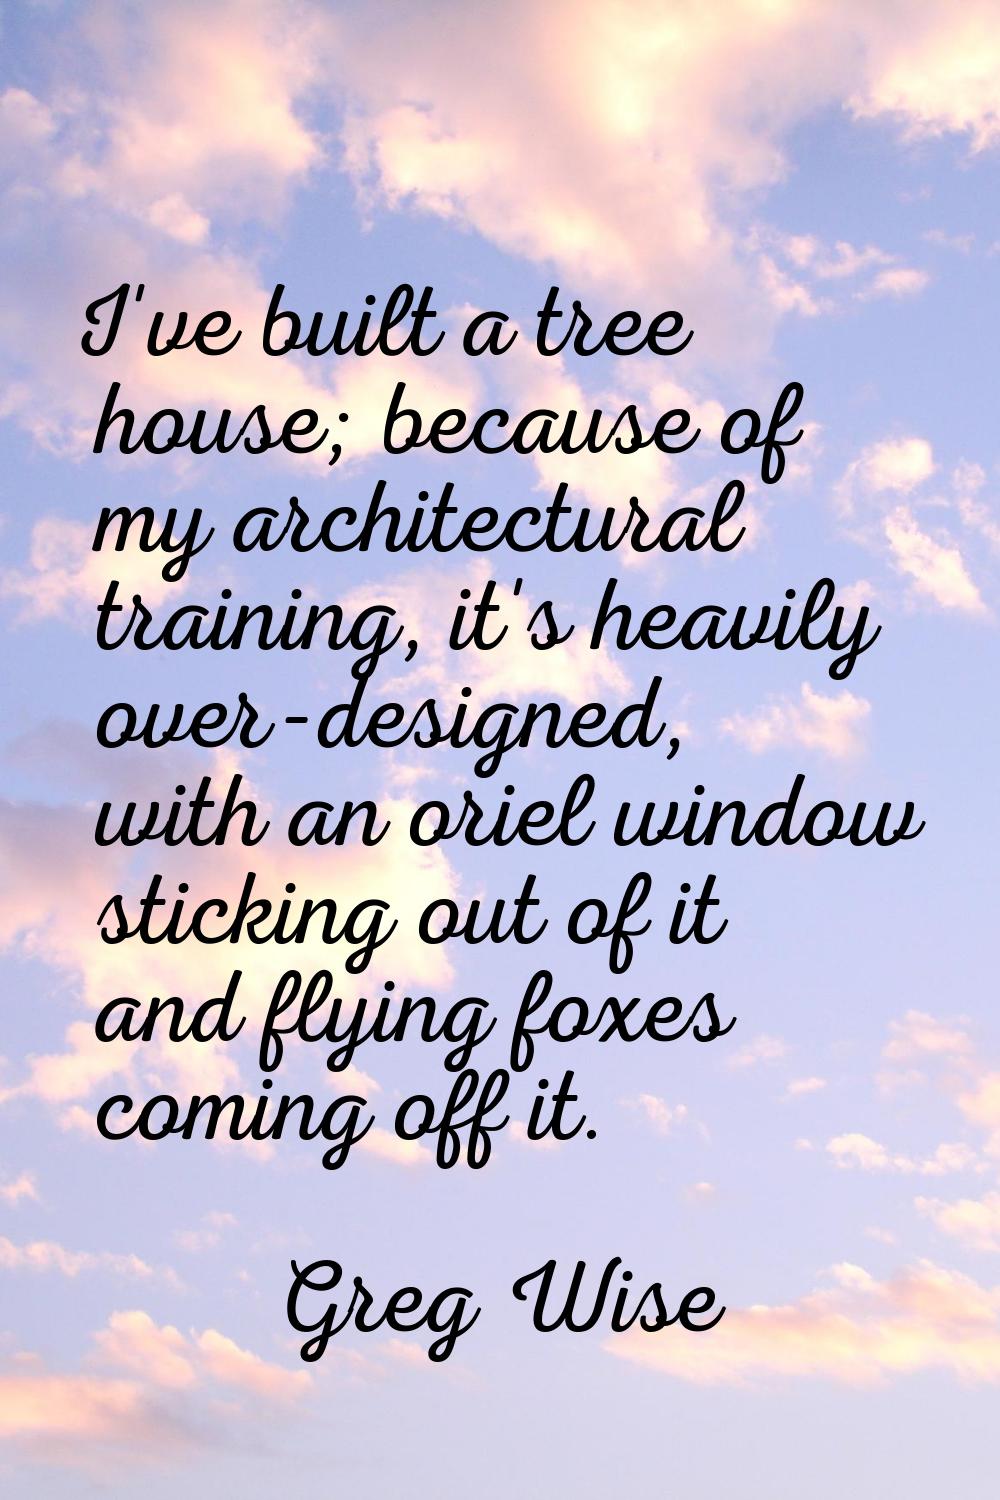 I've built a tree house; because of my architectural training, it's heavily over-designed, with an 